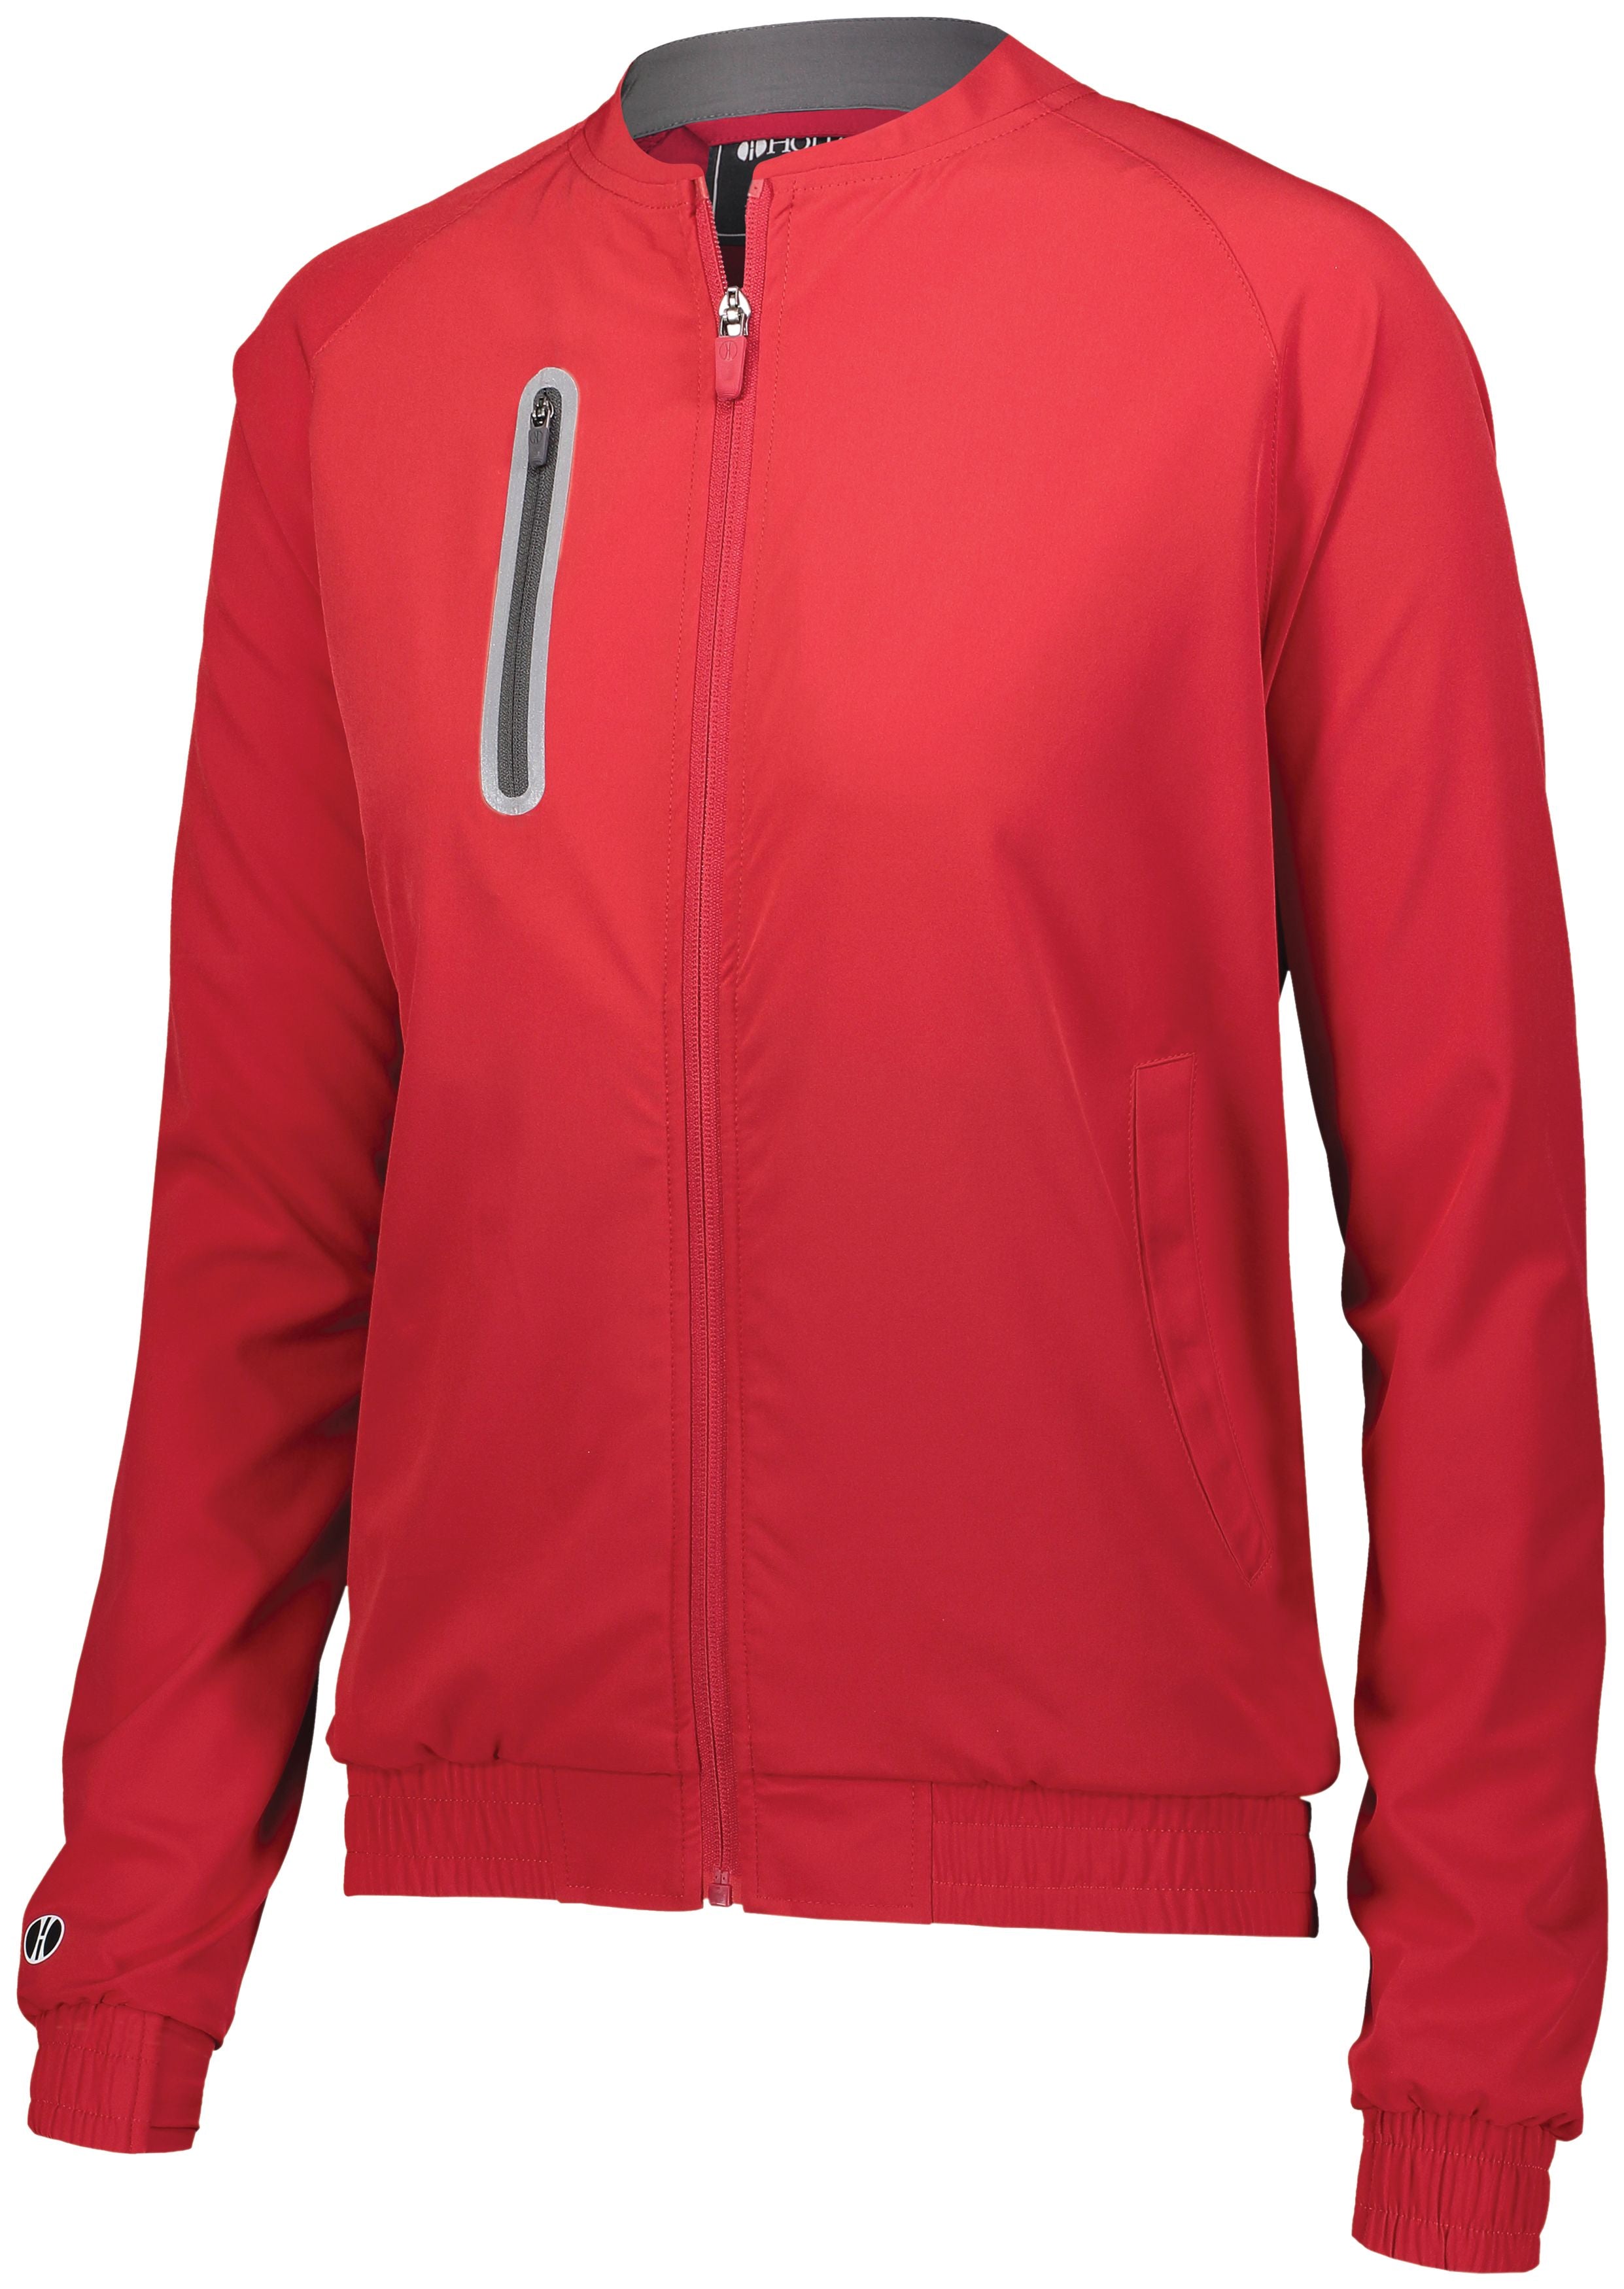 Holloway Ladies Weld Jacket in Scarlet  -Part of the Ladies, Ladies-Jacket, Holloway, Outerwear, Weld-Collection product lines at KanaleyCreations.com